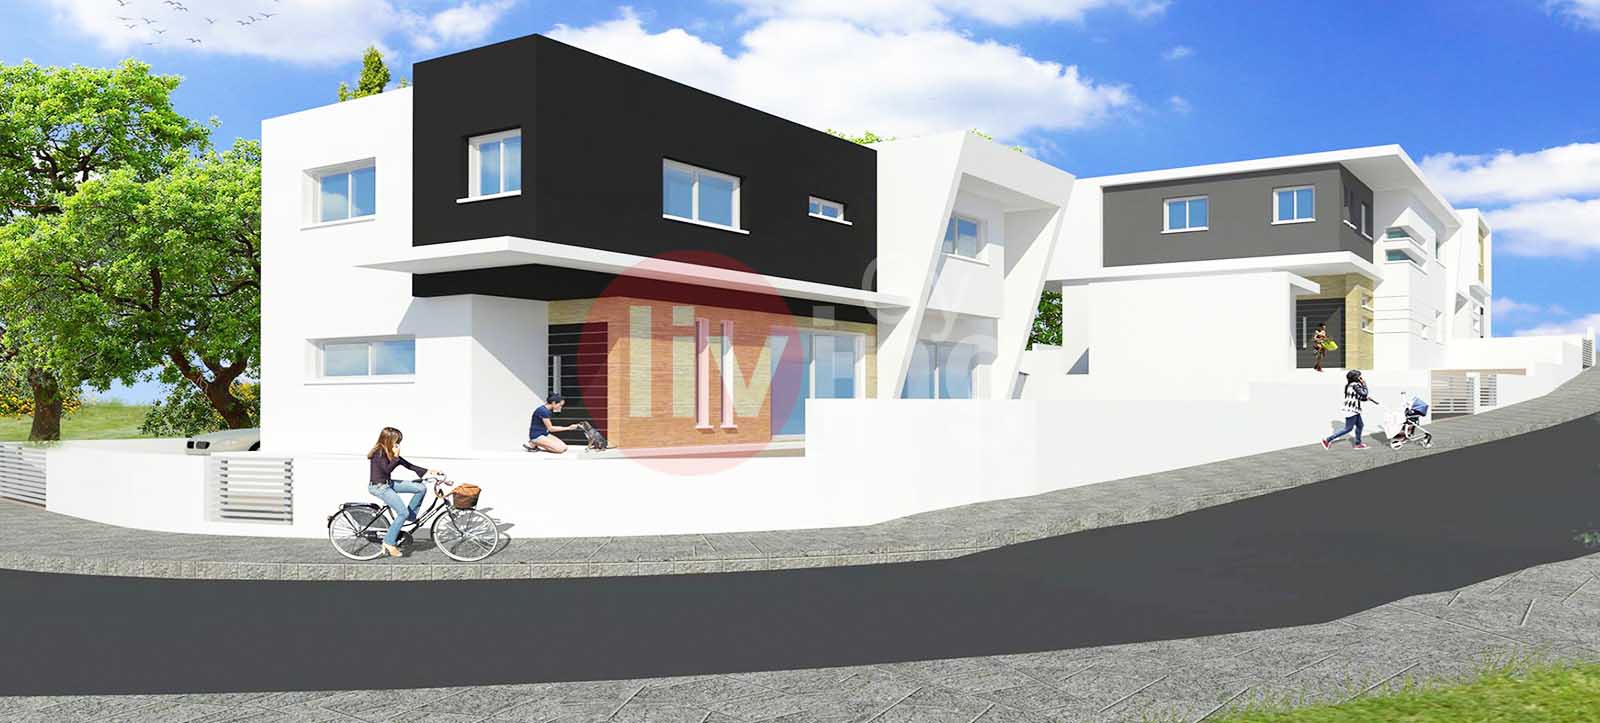 4 bedroom Detached House For Sale In Kallithea, Cyprus